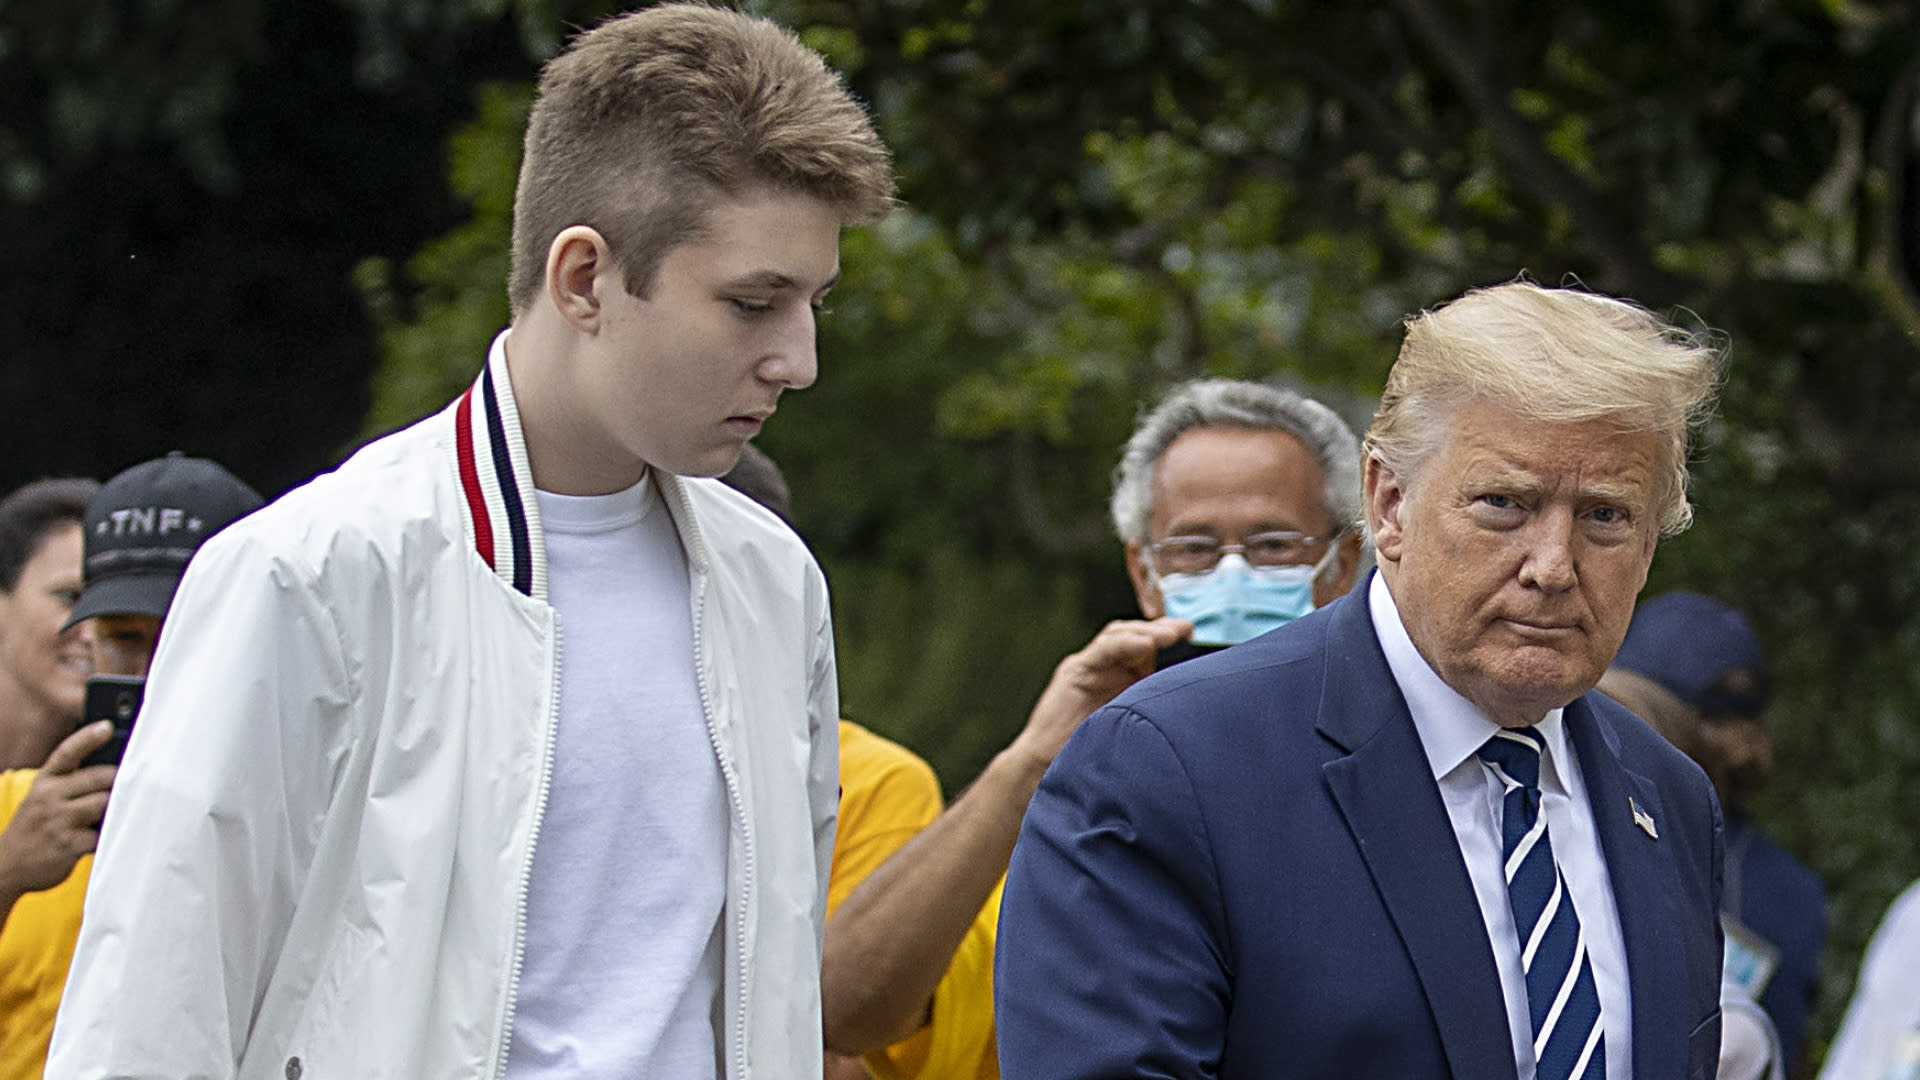 Barron Trump Looks Grown Up Towering Over Dad President Trump In Rare Sighting [Video]